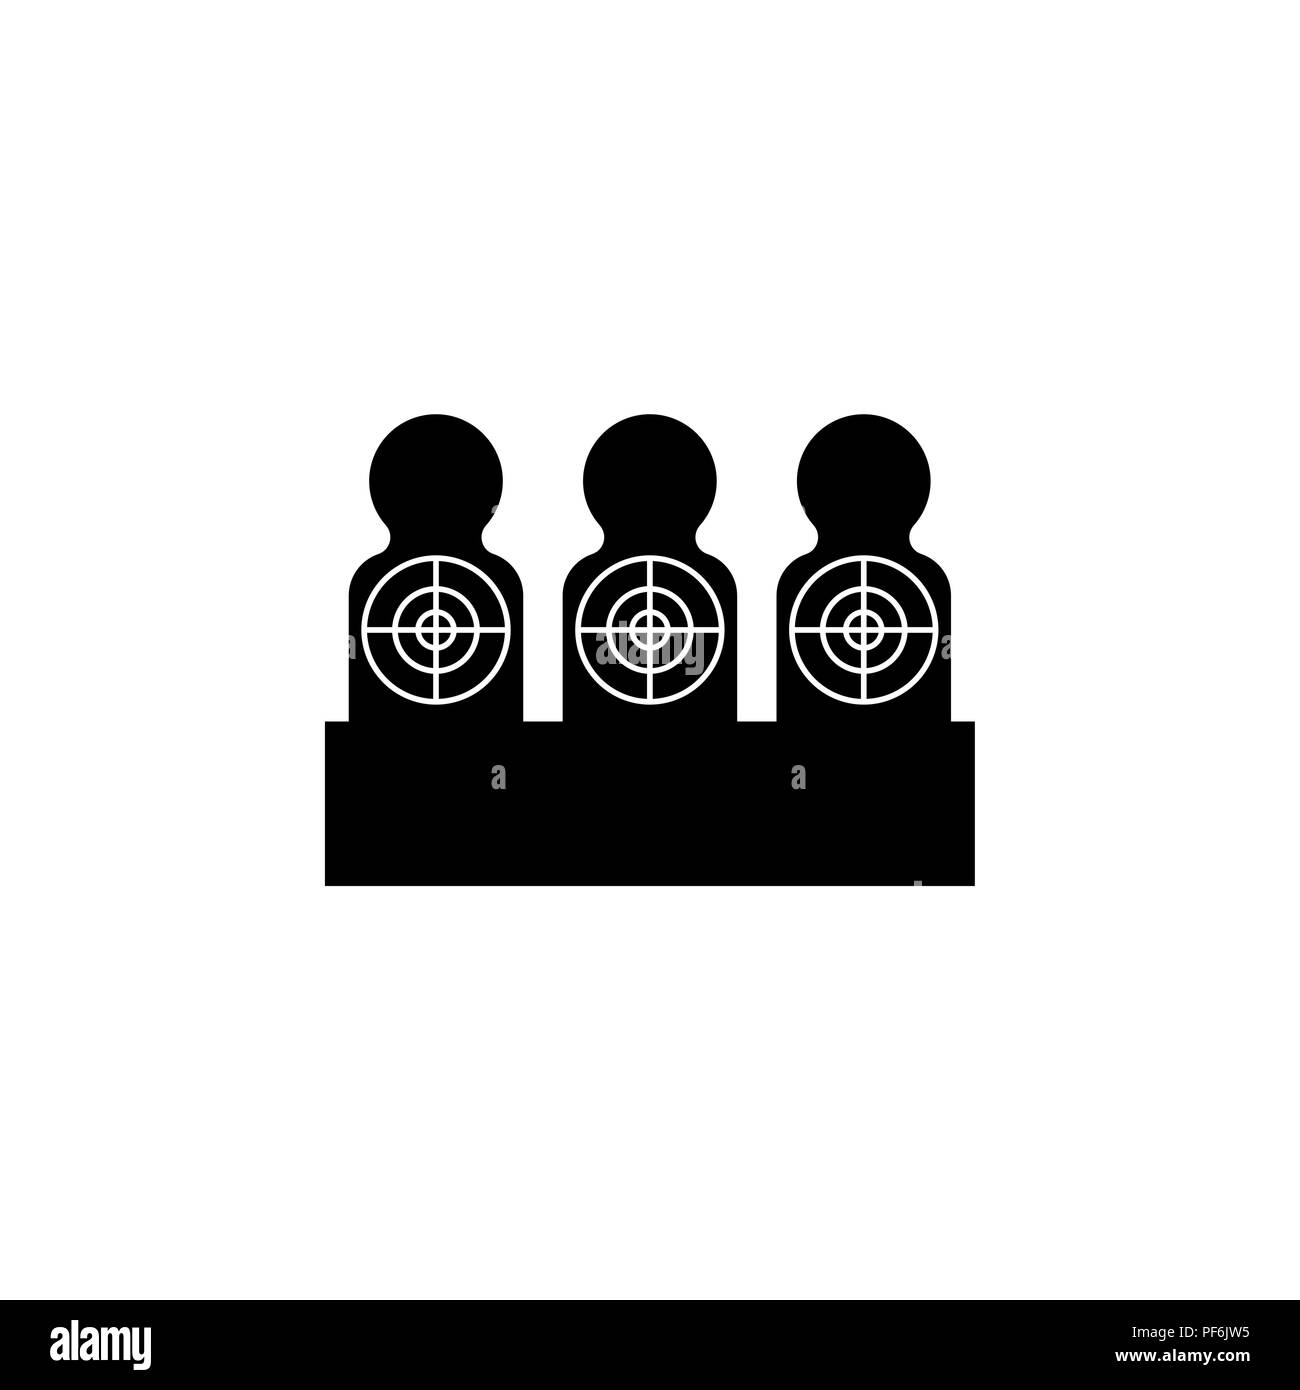 Targets for shooting. Target icon white on a black background Stock Vector